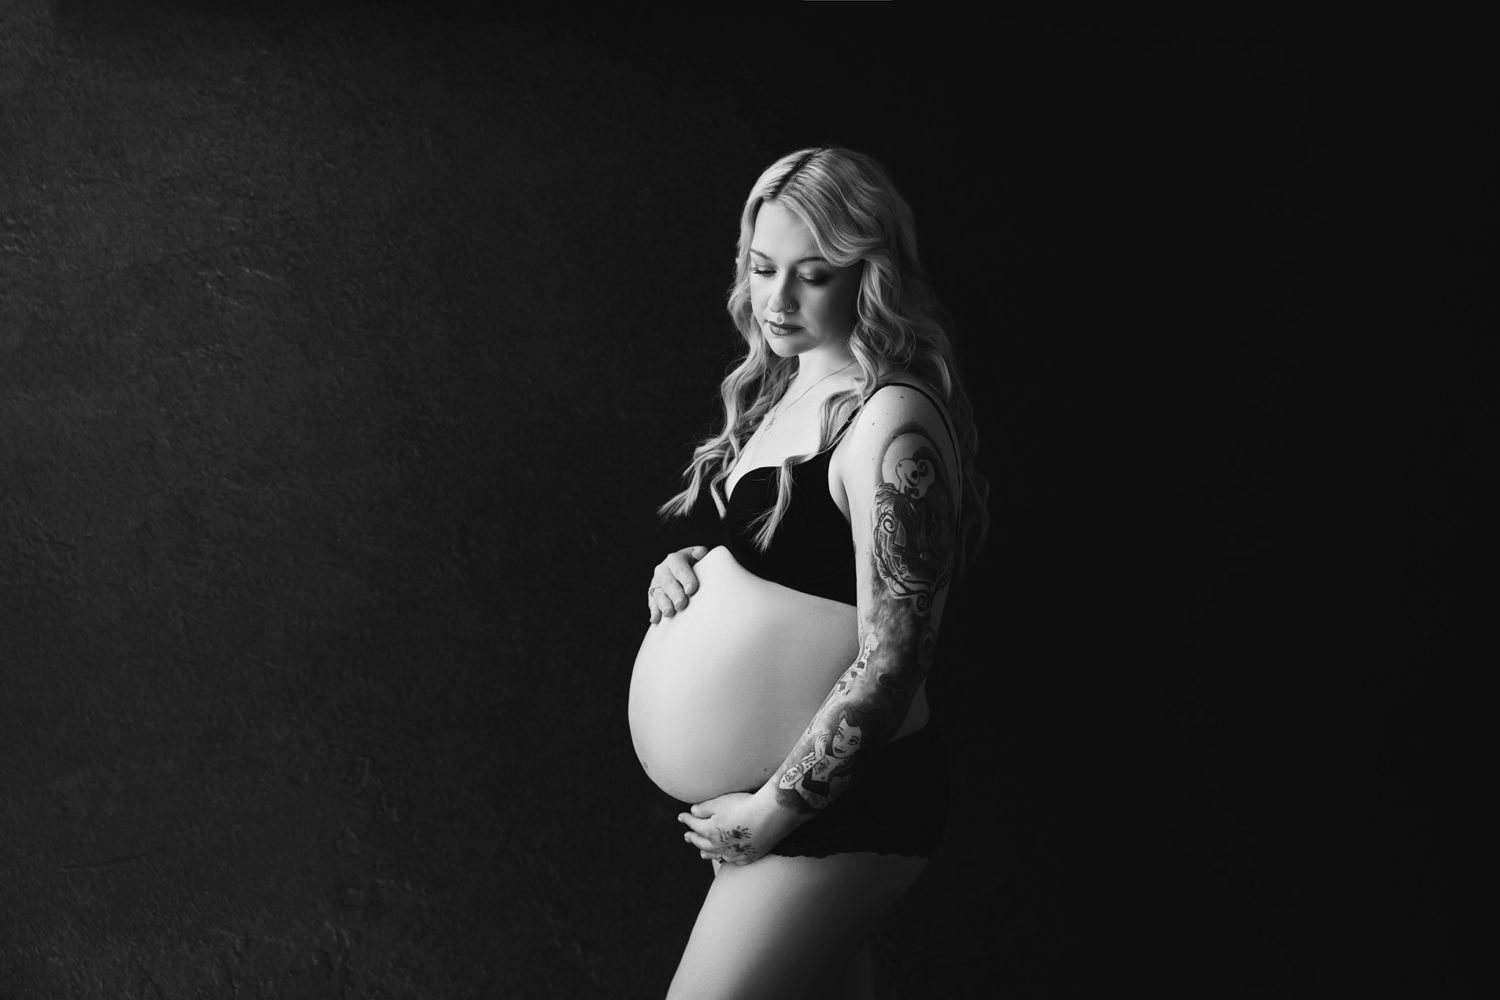 Pregnant woman dressed in black bra and underwear, dark black backdrop. Mum is holding her belly while looking down at her belly. Black and white photograph